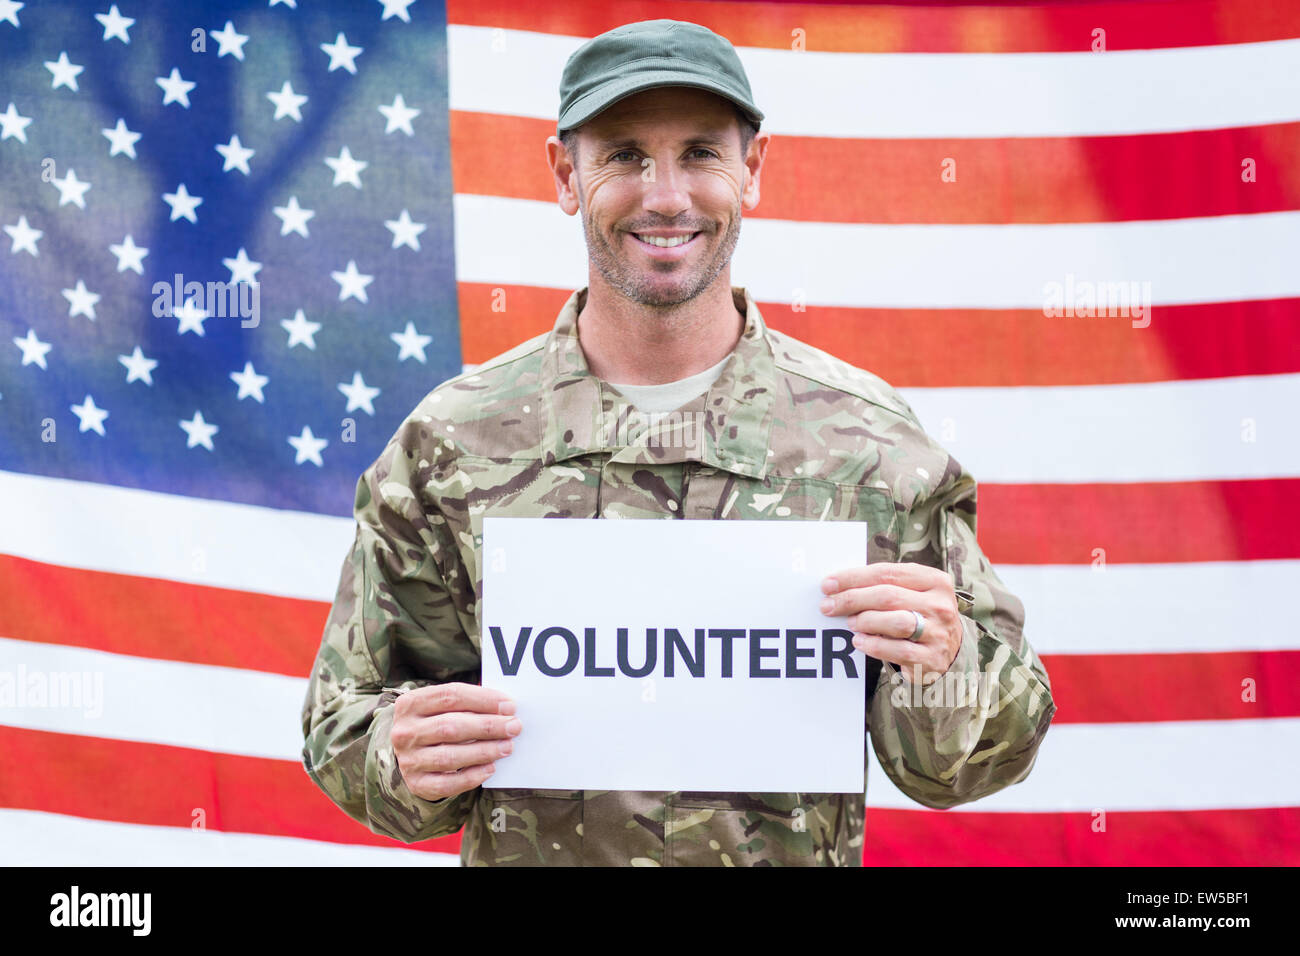 American soldier holding recruitment sign Stock Photo